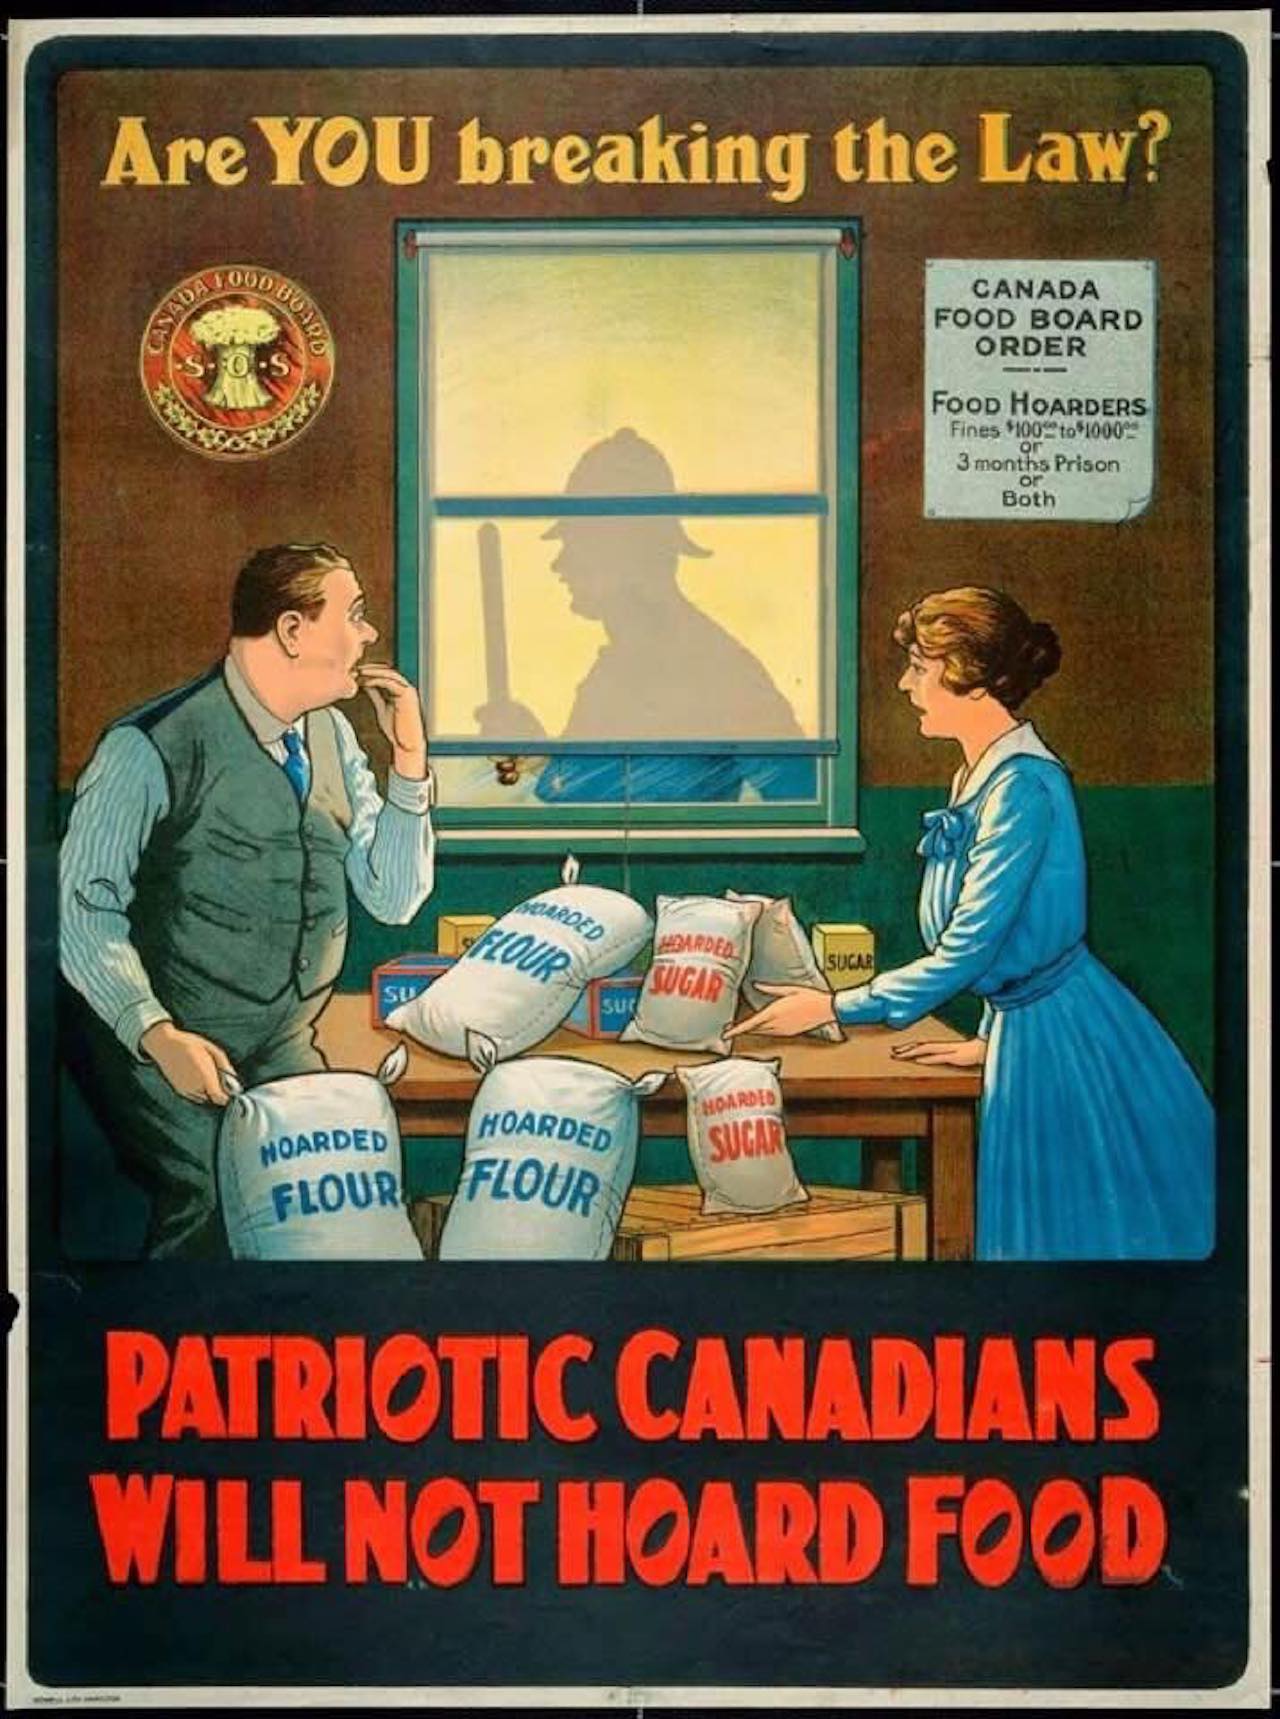 WWI-No Hoarding Food Poster